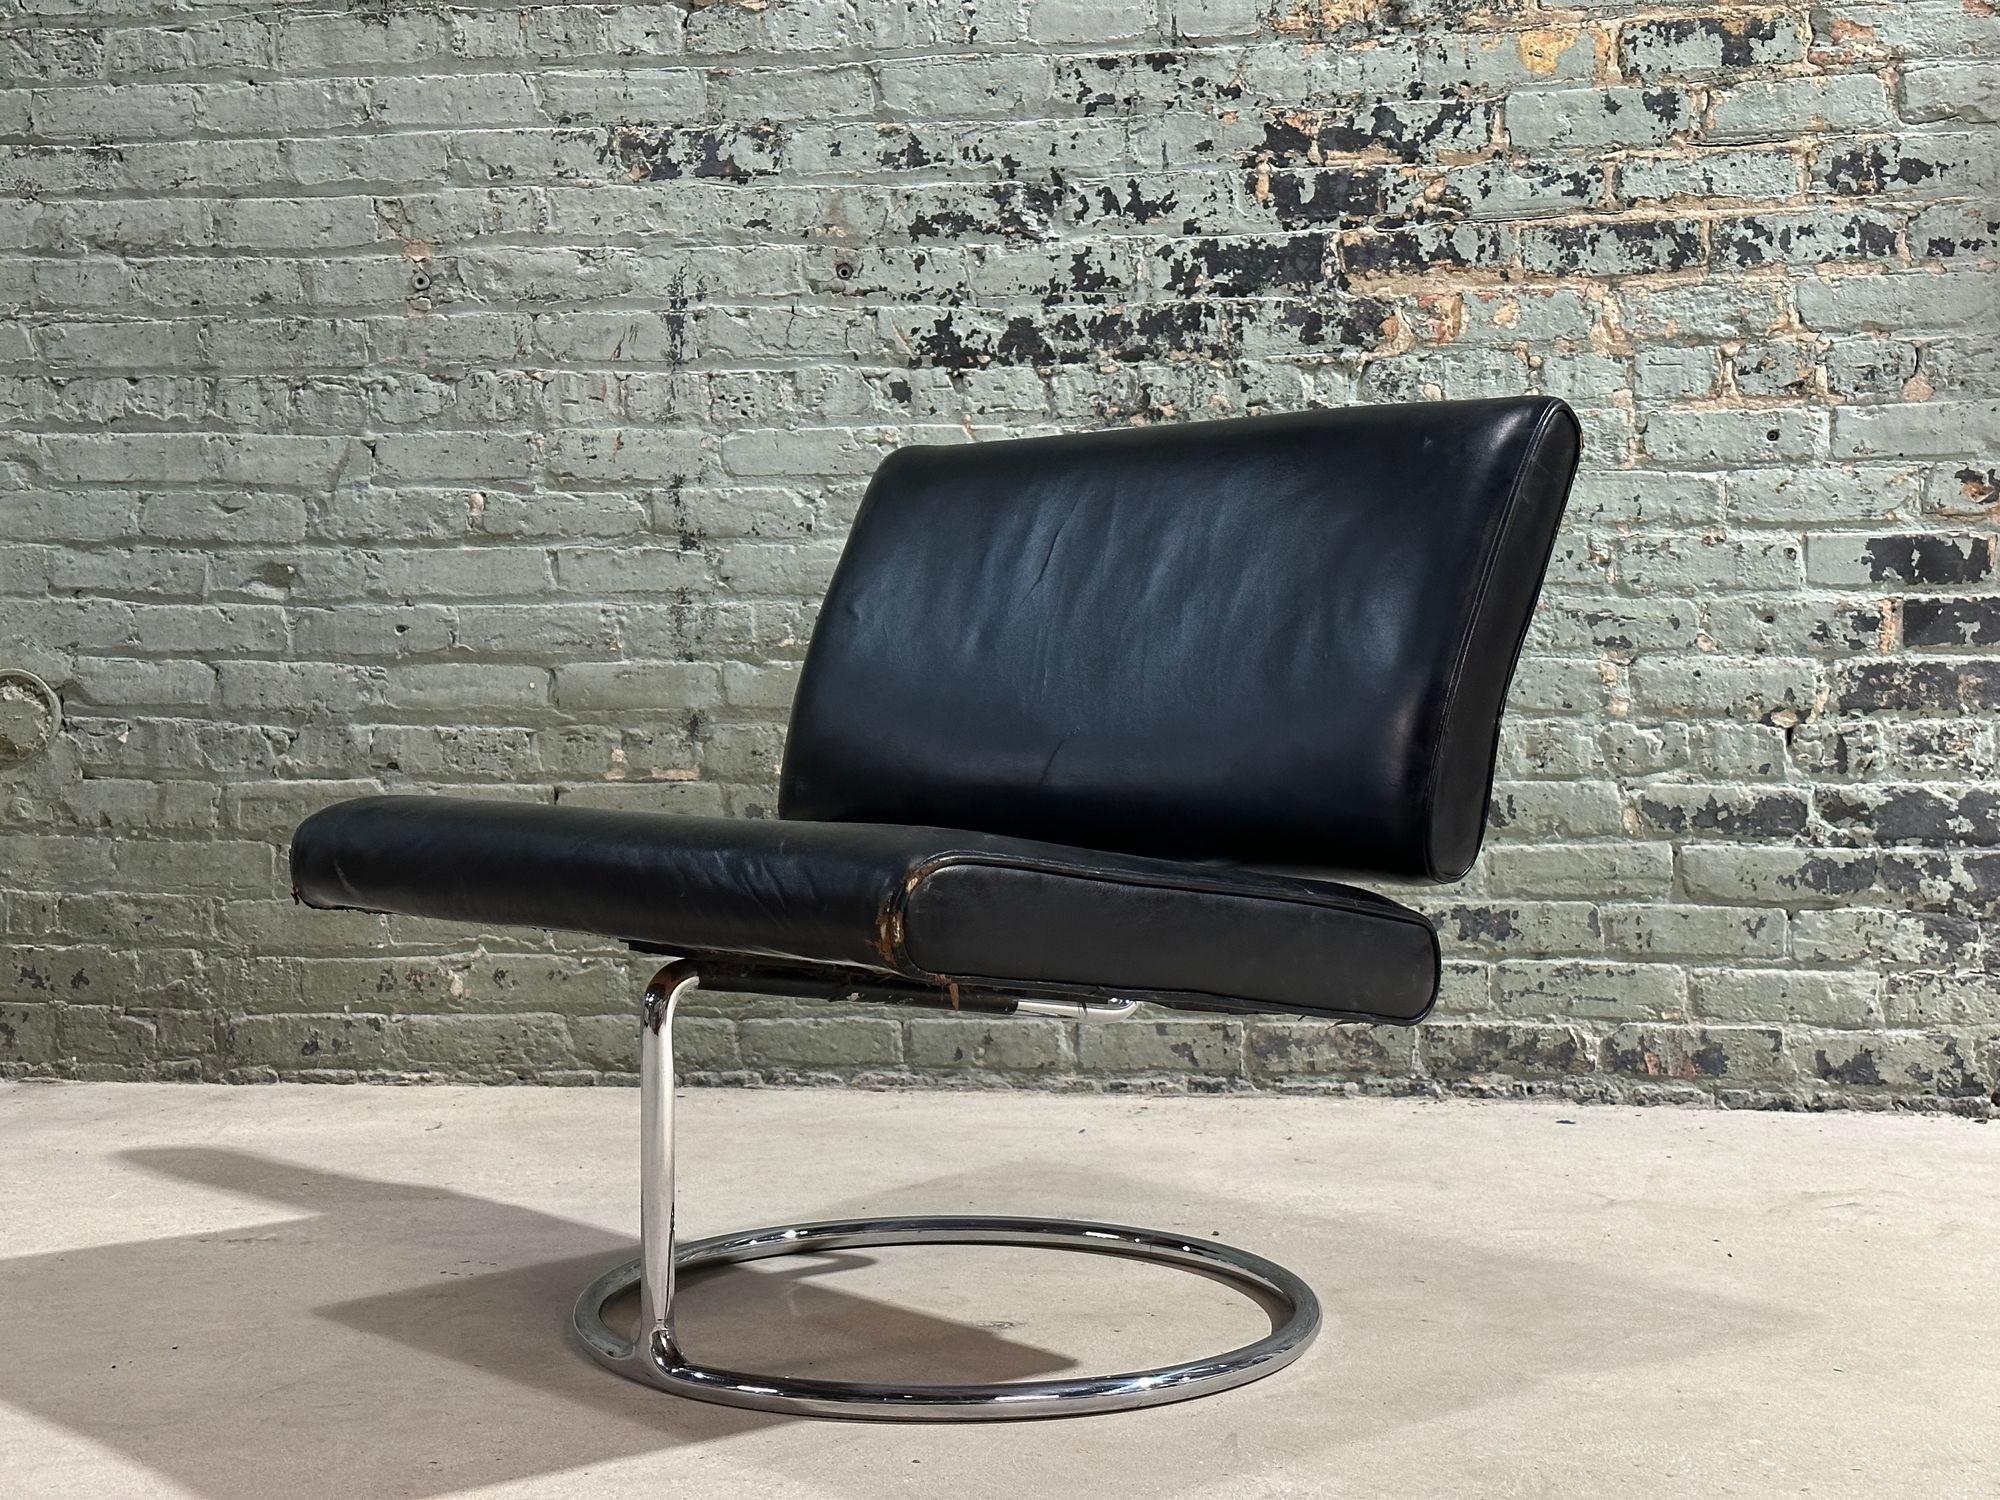 Mid Century Leather and Stainless Steel Cantilever Lounge Chair, 1960.  Original condition, wear consistent with age and use.